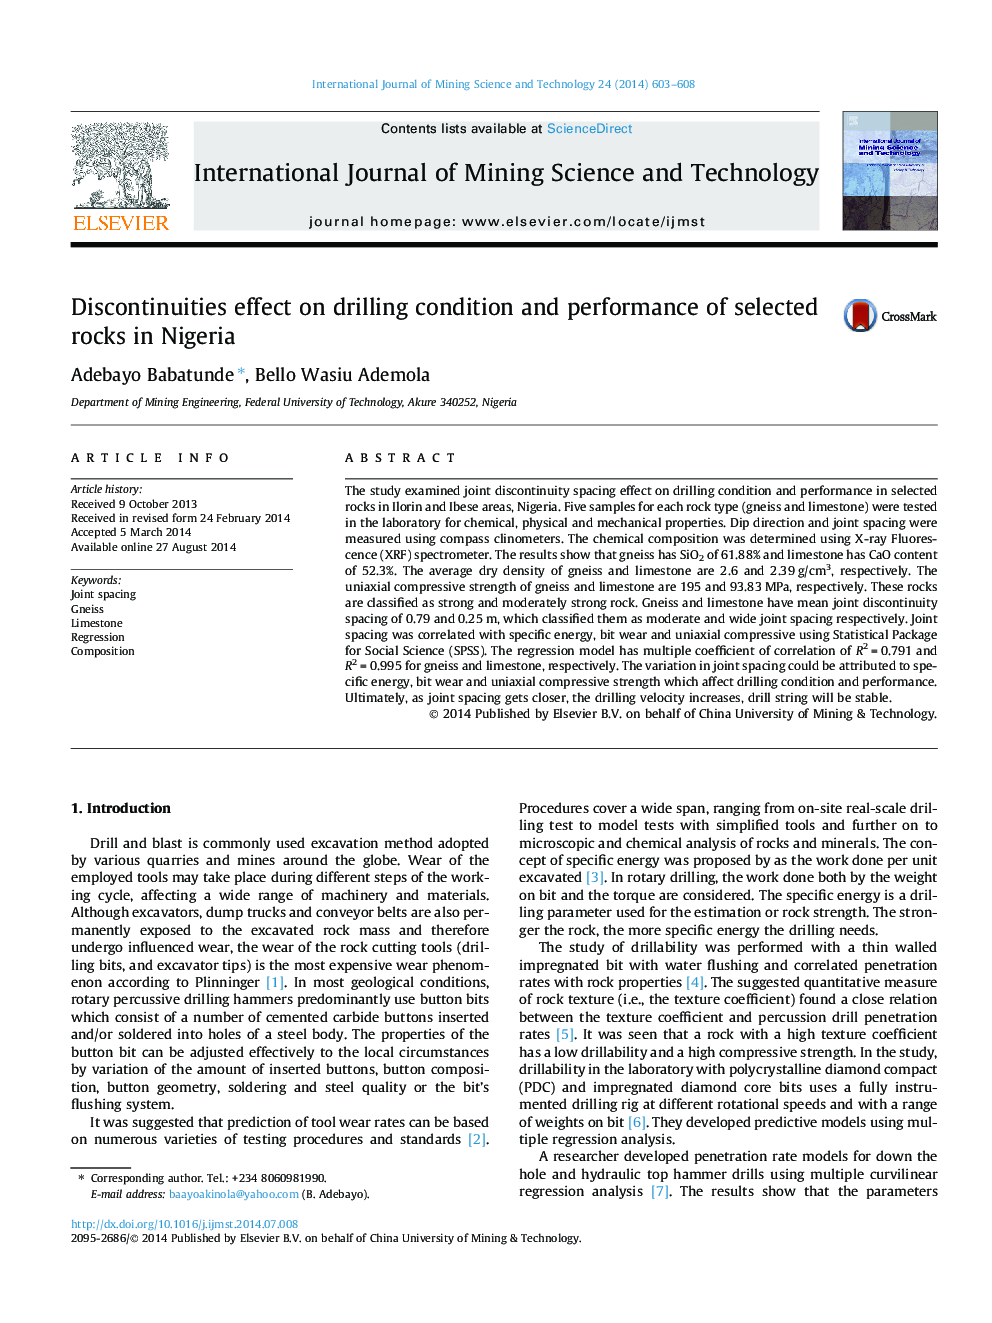 Discontinuities effect on drilling condition and performance of selected rocks in Nigeria